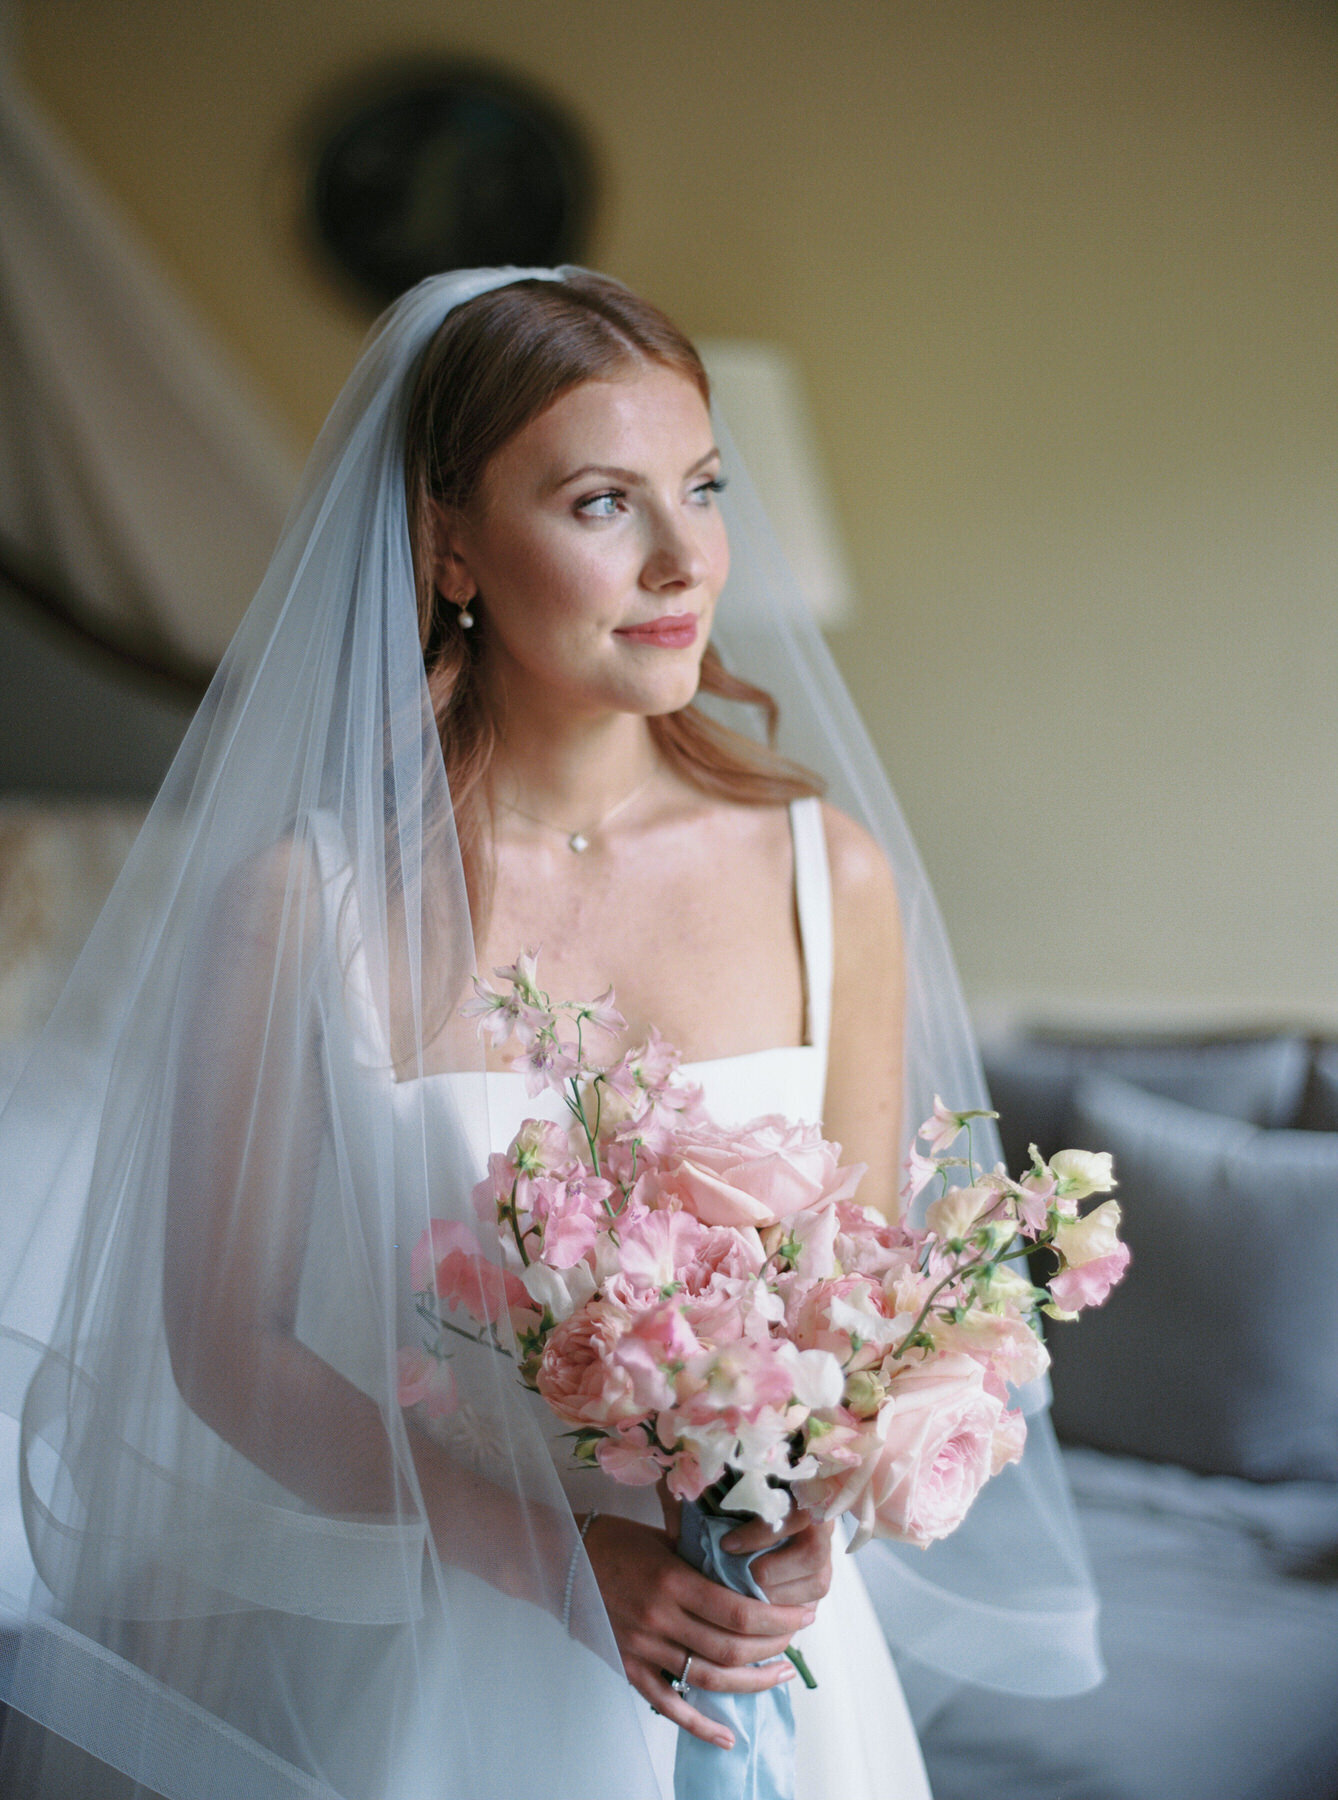 Bride with veil and bouquet of pink flowers